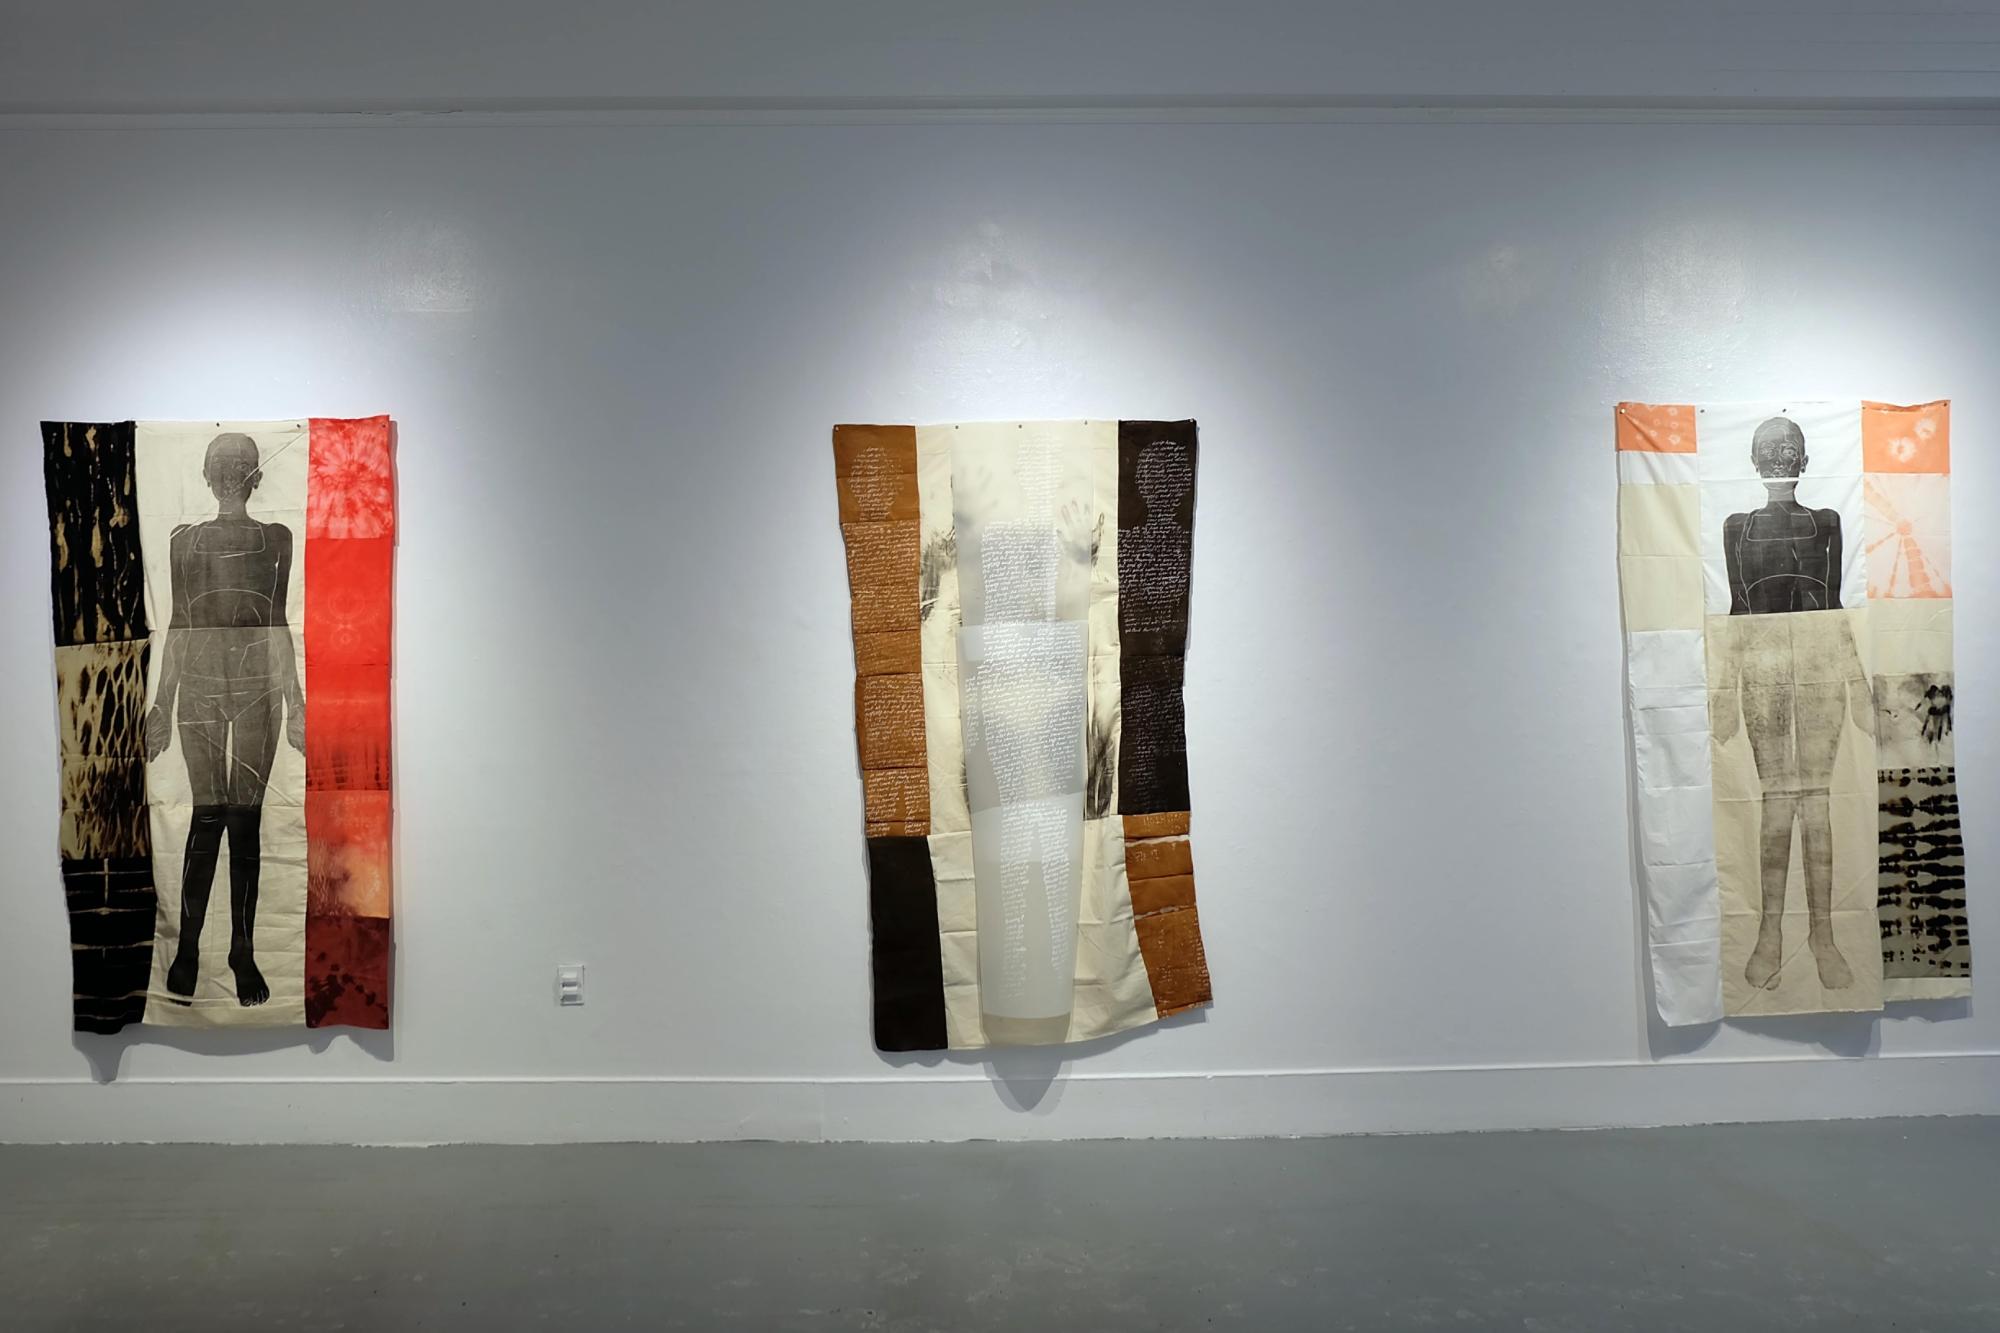 Three 6 foot tall prints of black bodies on quilted fabric hang in a gallery space